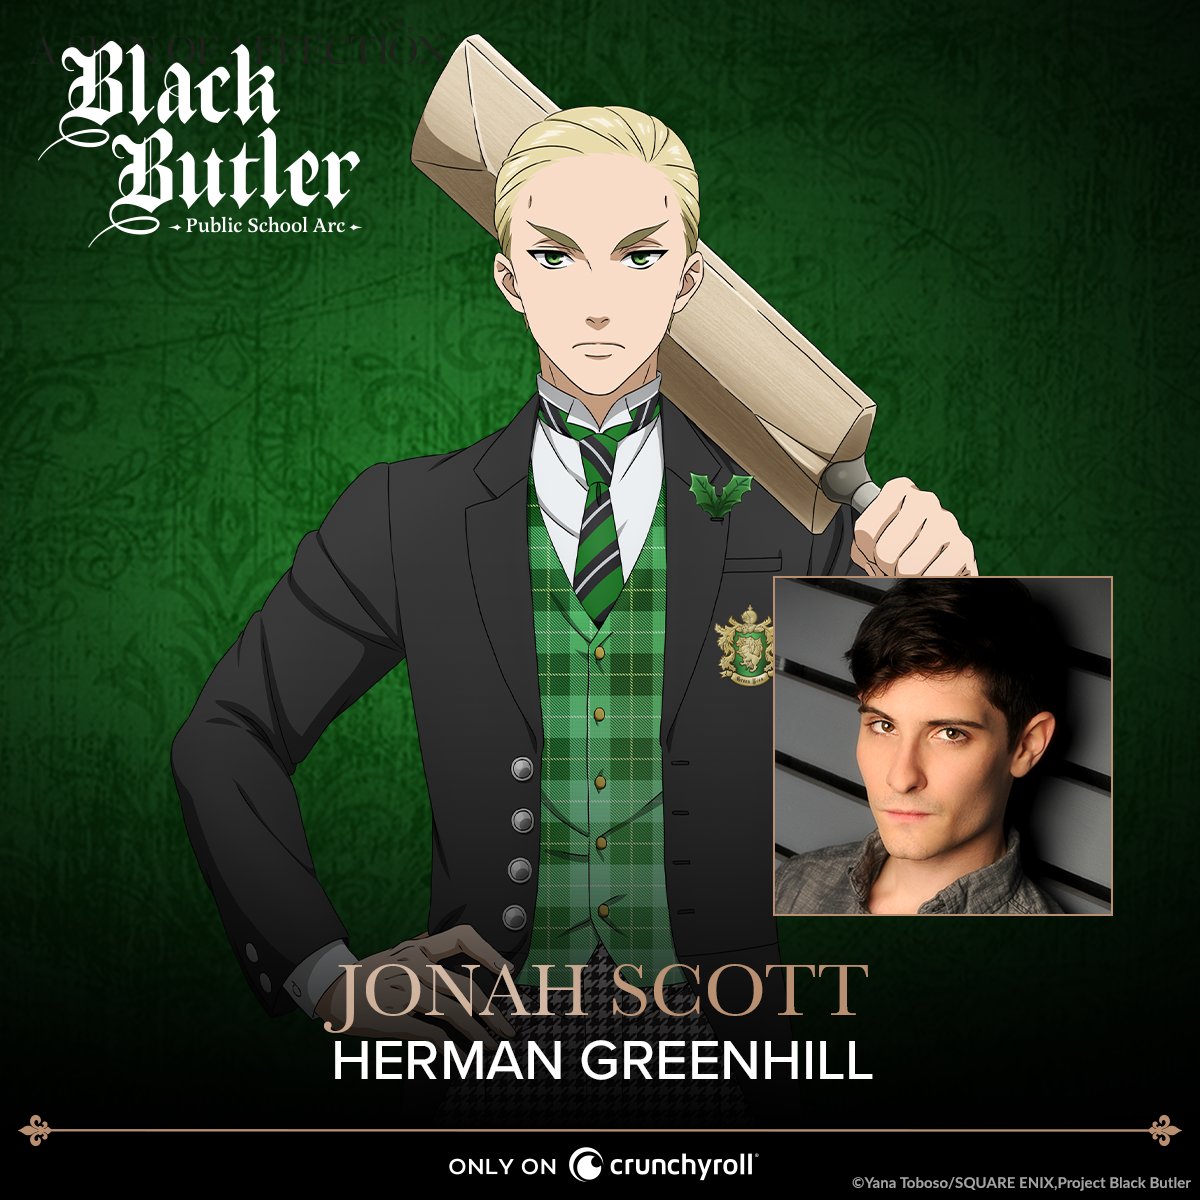 ☕️ TALLYHOOOOOO!!!☕️ WITH GUSTO I ANNOUNCE- I voice Prefect Herman Greenhill in the Black Butler Public School Arc!! Once, a pipedream of a young weeb. Now reality. This show means ALOT to me and I can't wait to wot-wot for you all! Thank you to @caitlinsvoice and the cast!!